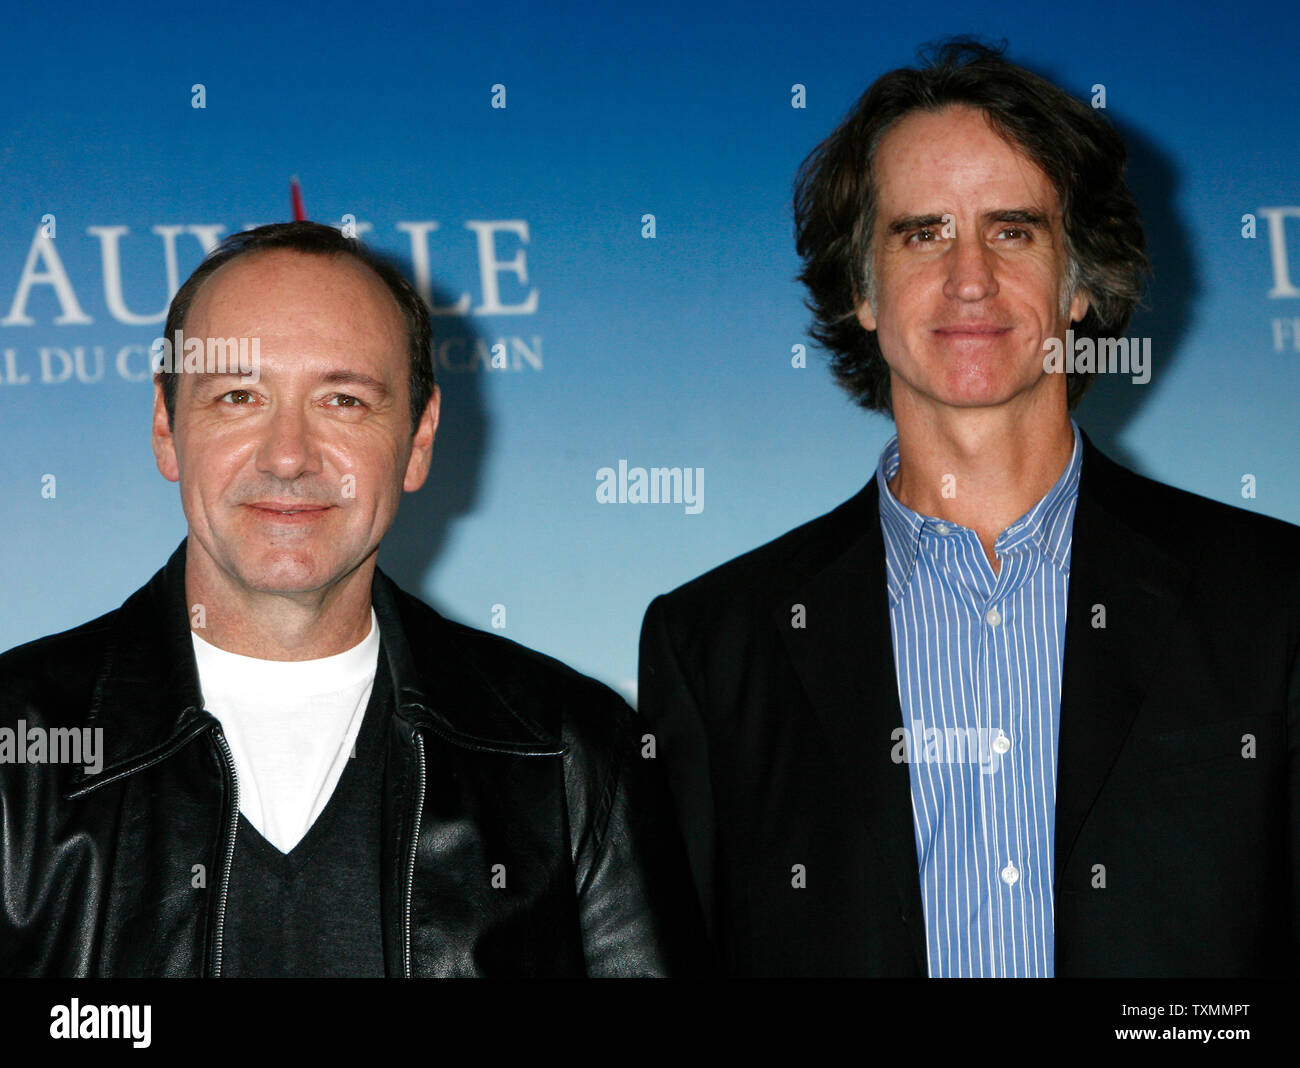 Actor Kevin Spacey (L) and director Jay Roach arrive at a photocall for the HBO movie 'Recount' during the 34th American Film Festival of Deauville in Deauville, France on September 9, 2008.    (UPI Photo/David Silpa) Stock Photo